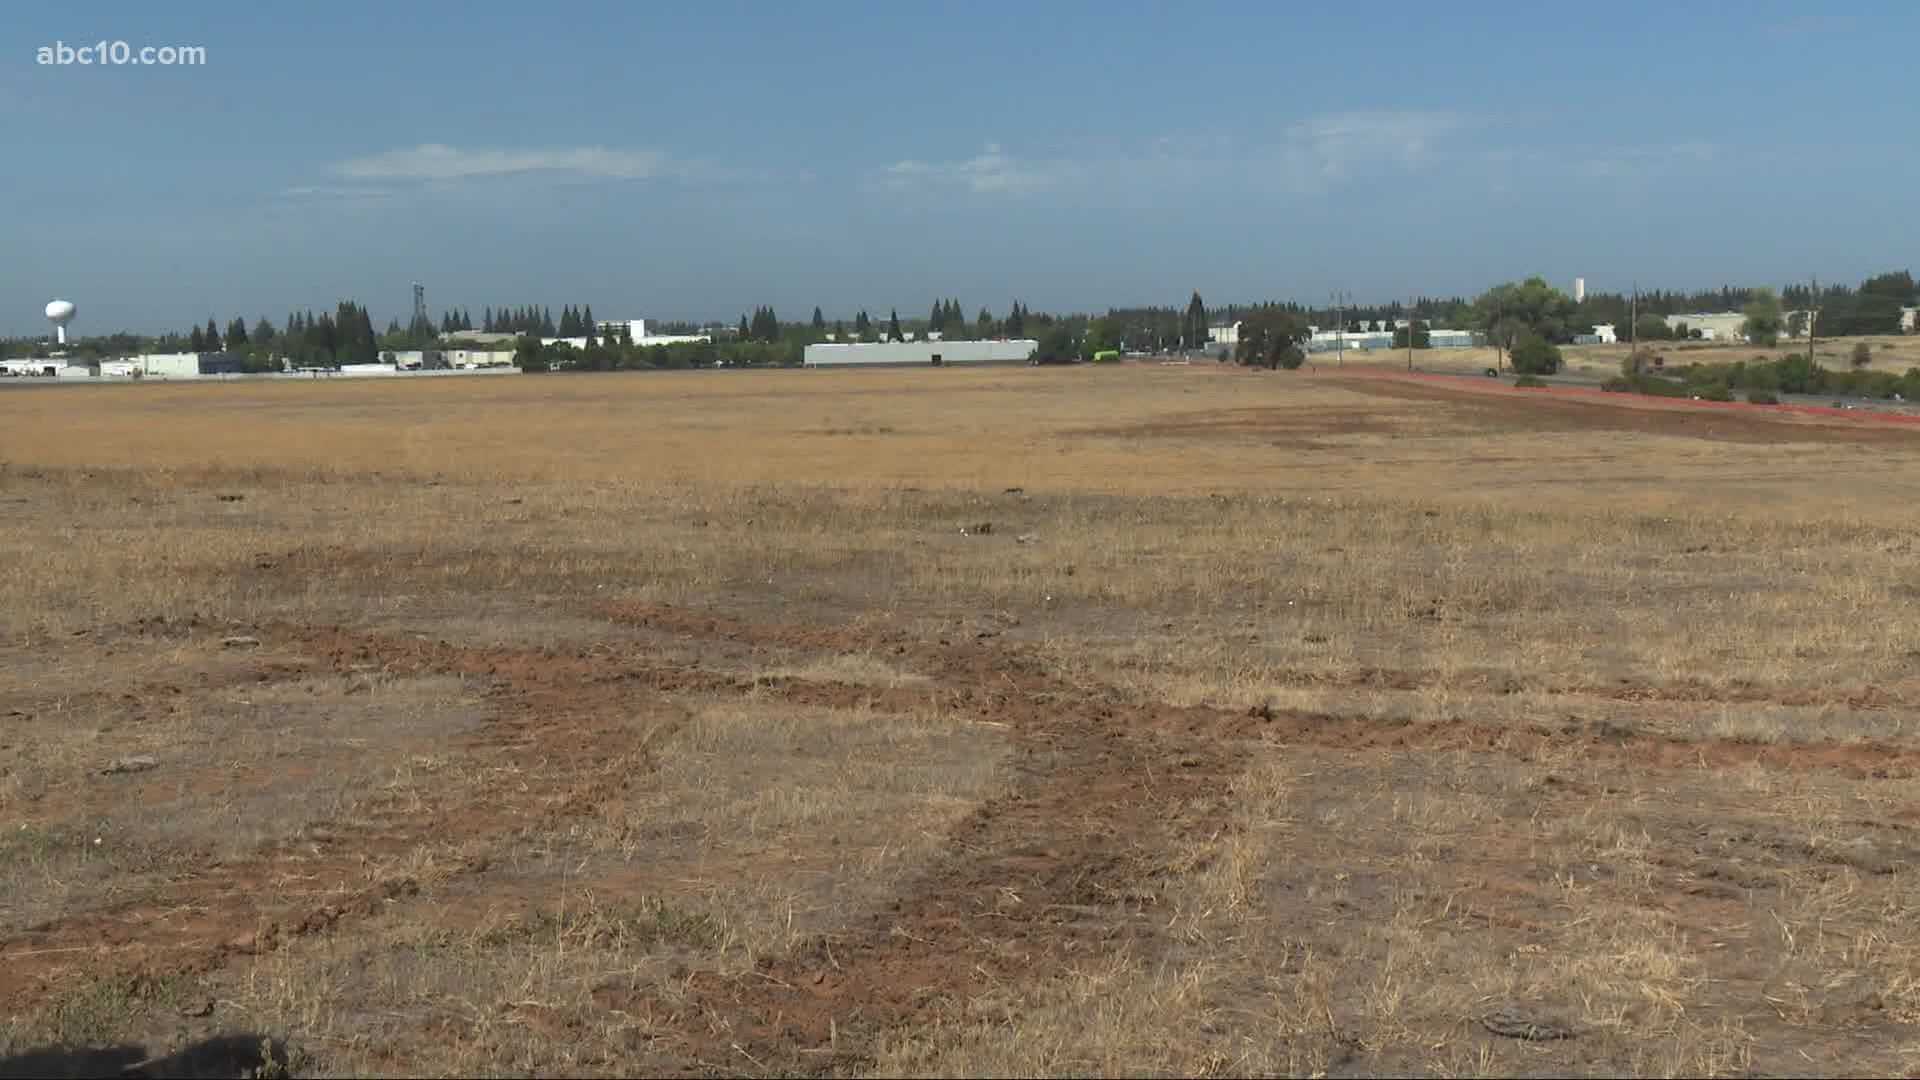 Rancho Cordova recently broke ground on the Rio Del Oro development, which is the largest development in the city's history.